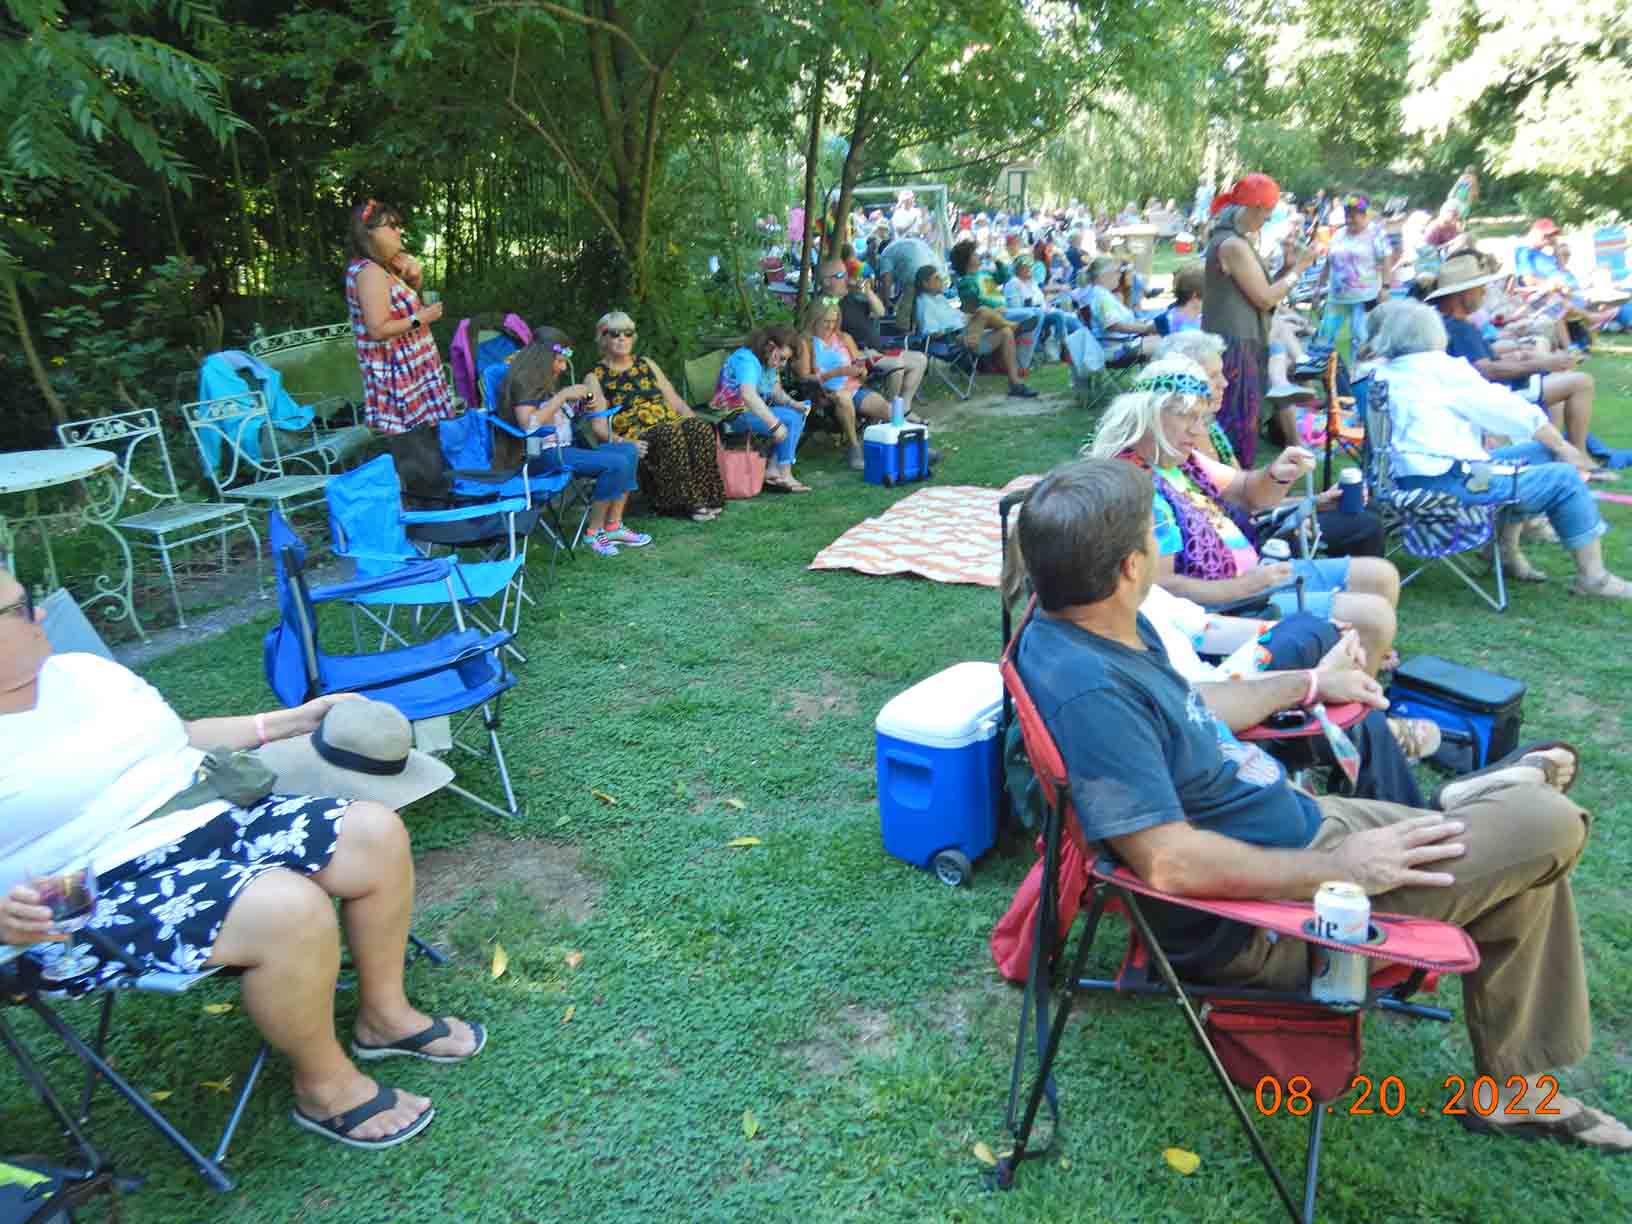 HippiefestAudienceCrowd82022 Milford LIVE! Local Delaware News